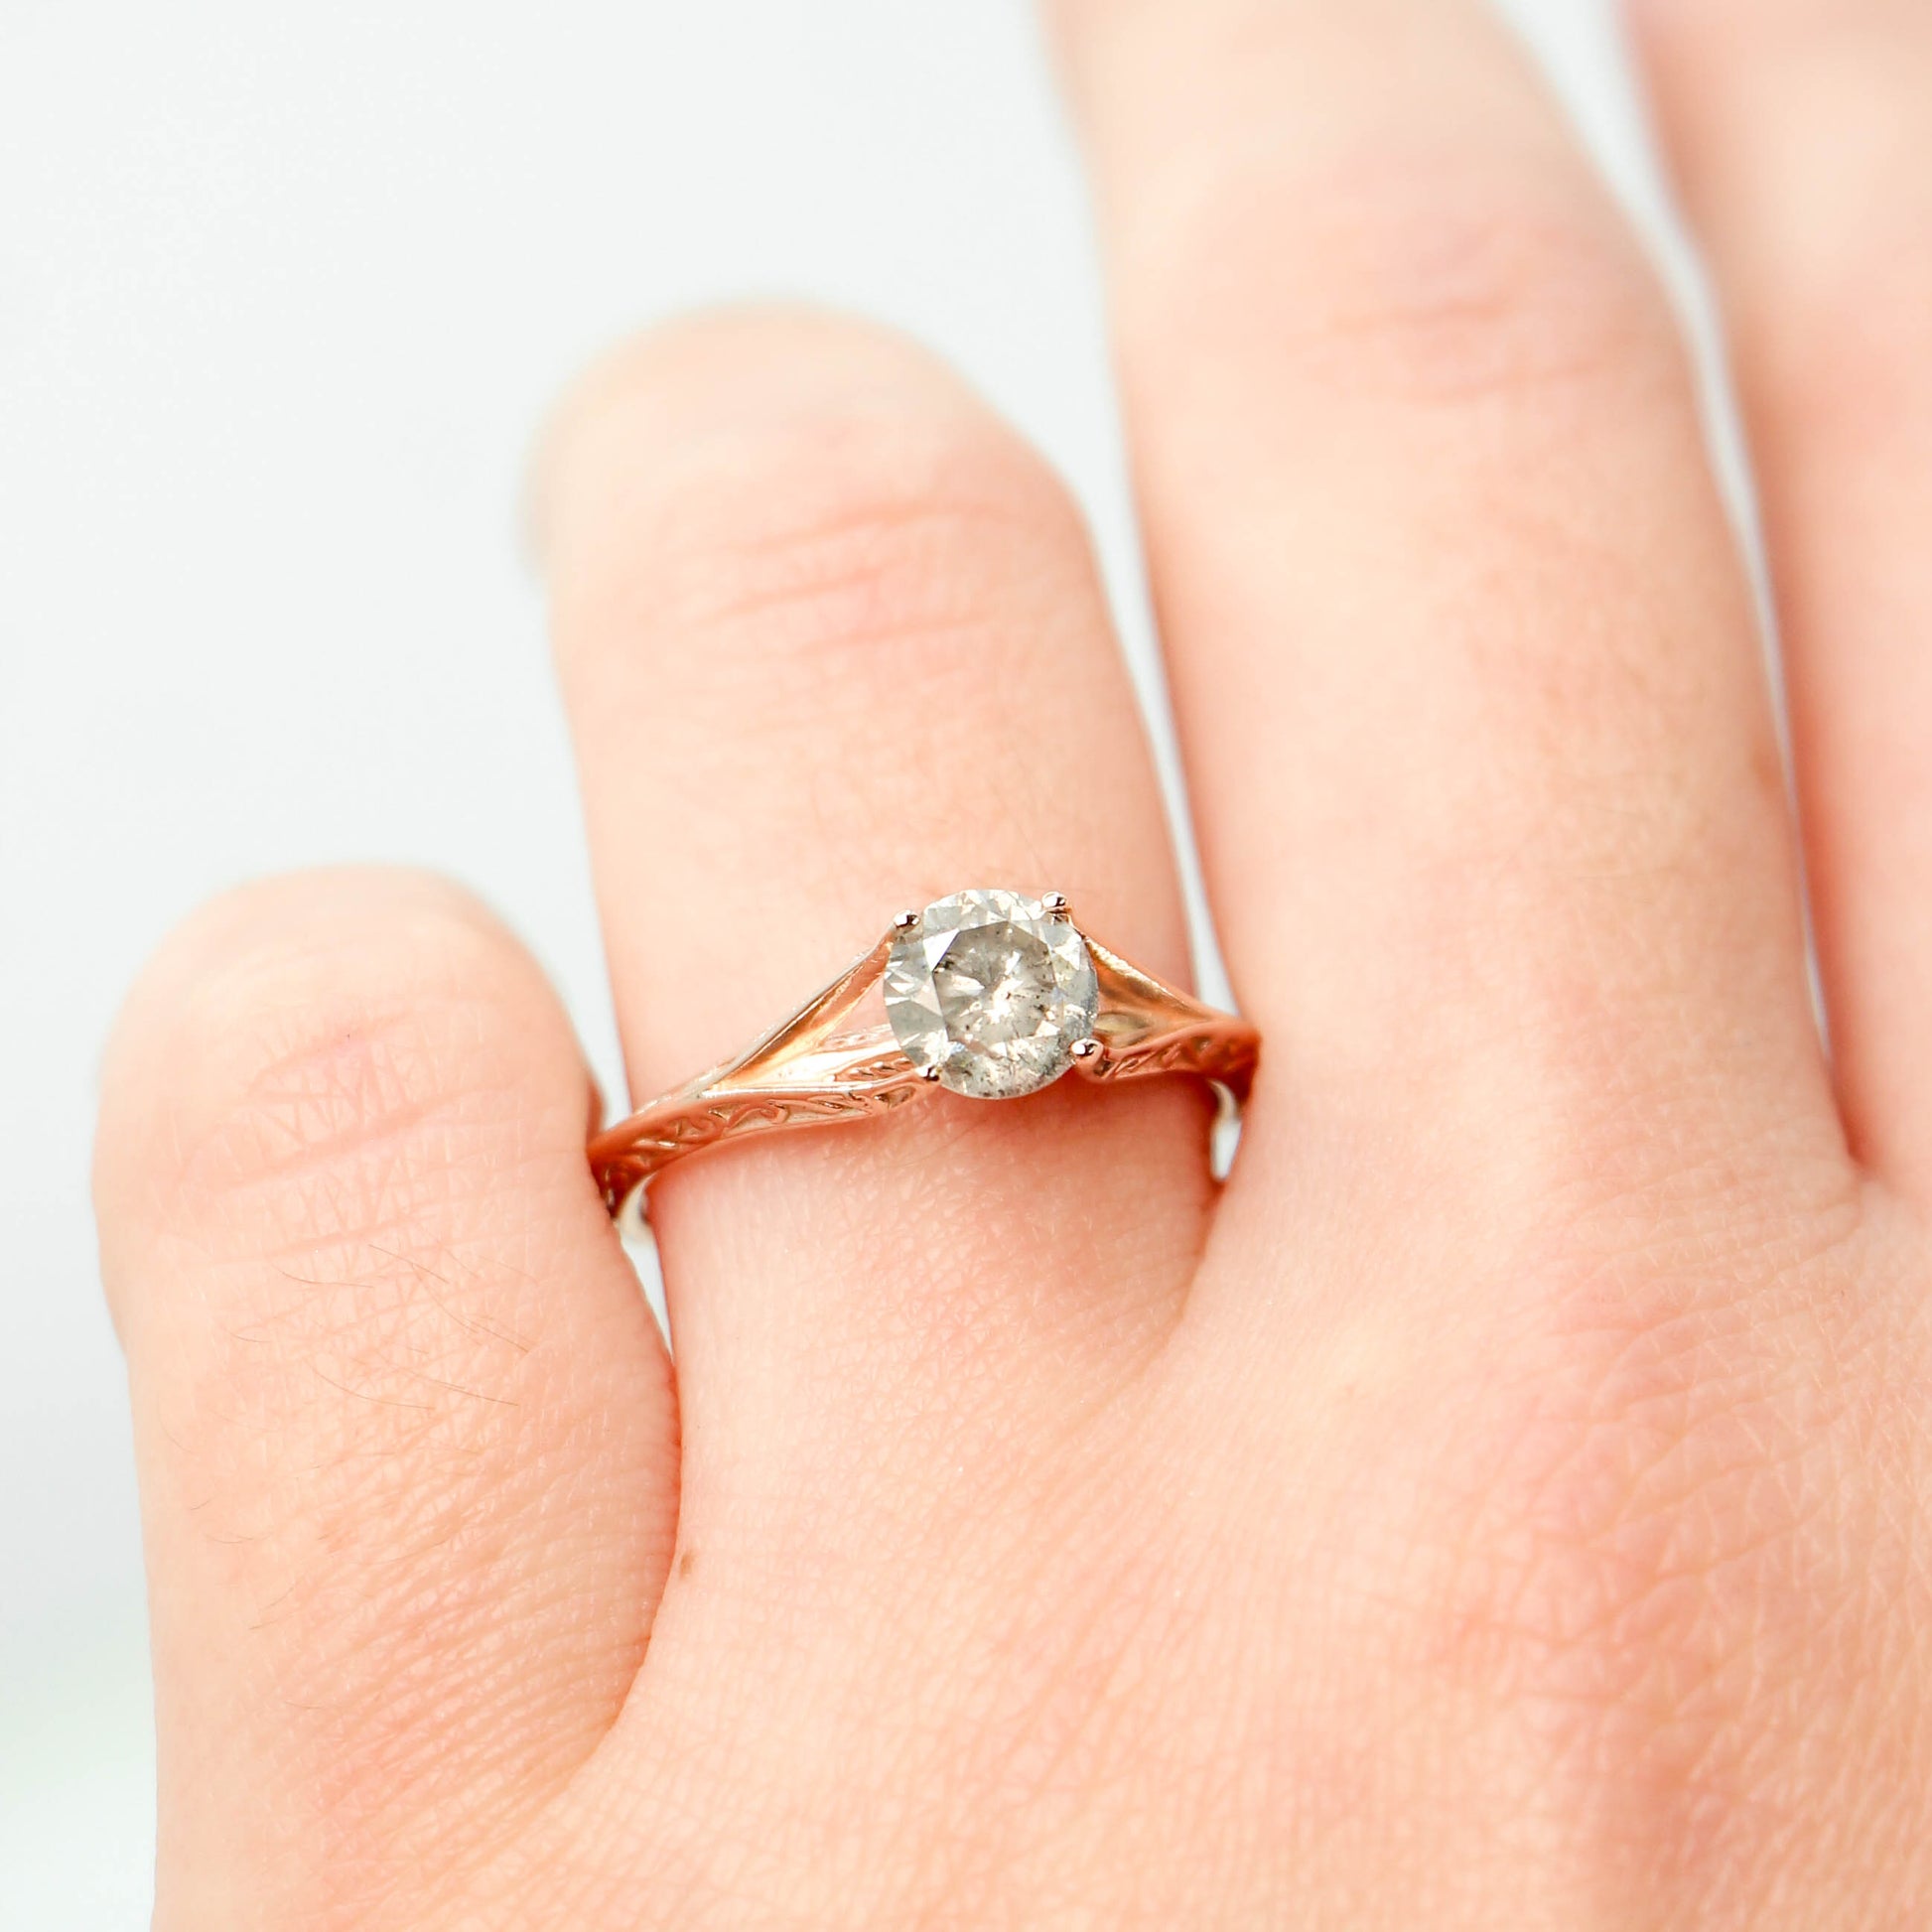 Ivy Ring with a 0.98 Carat Round Light Gray Celestial Diamond in 14k Rose Gold - Ready to Size and Ship - Midwinter Co. Alternative Bridal Rings and Modern Fine Jewelry